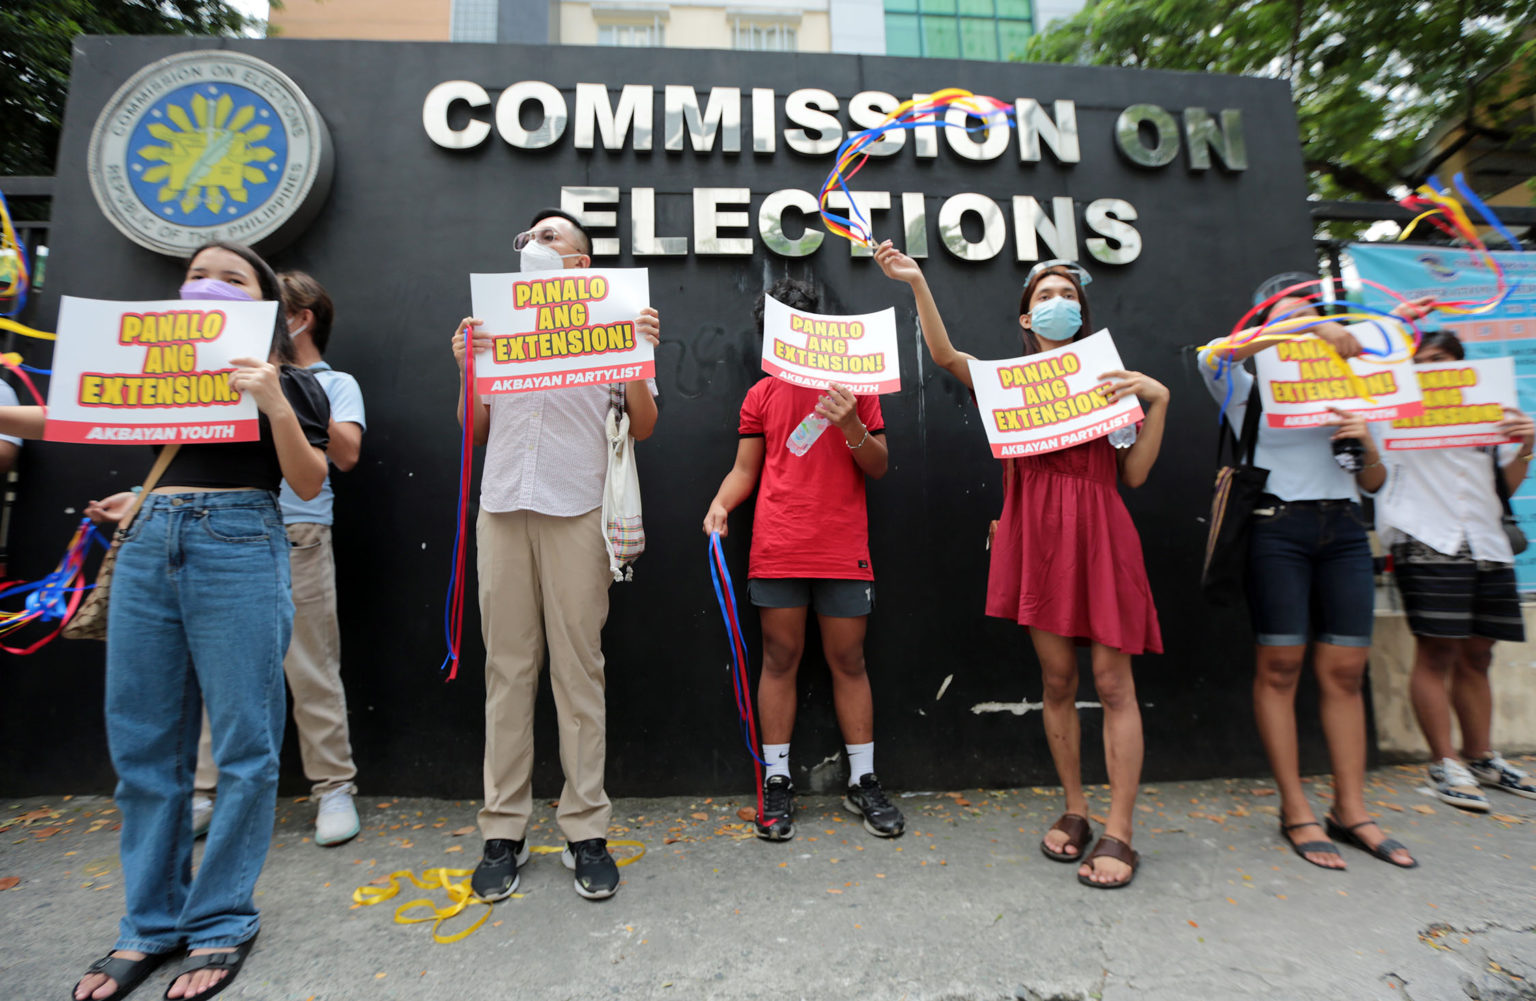 JOYFUL EXTENSION / SEPTEMBER 29, 2021
Akbayan partylist, Akbayan Youth members troop at the Commission on Elections (COMELEC) office in Quezon City on Wednesday, September 29, 2021, to celebrate the commission en banc decision extending the deadline of the country's voters' registration from October 9 to 31.
INQUIRER PHOTO / GRIG C. MONTEGRANDE